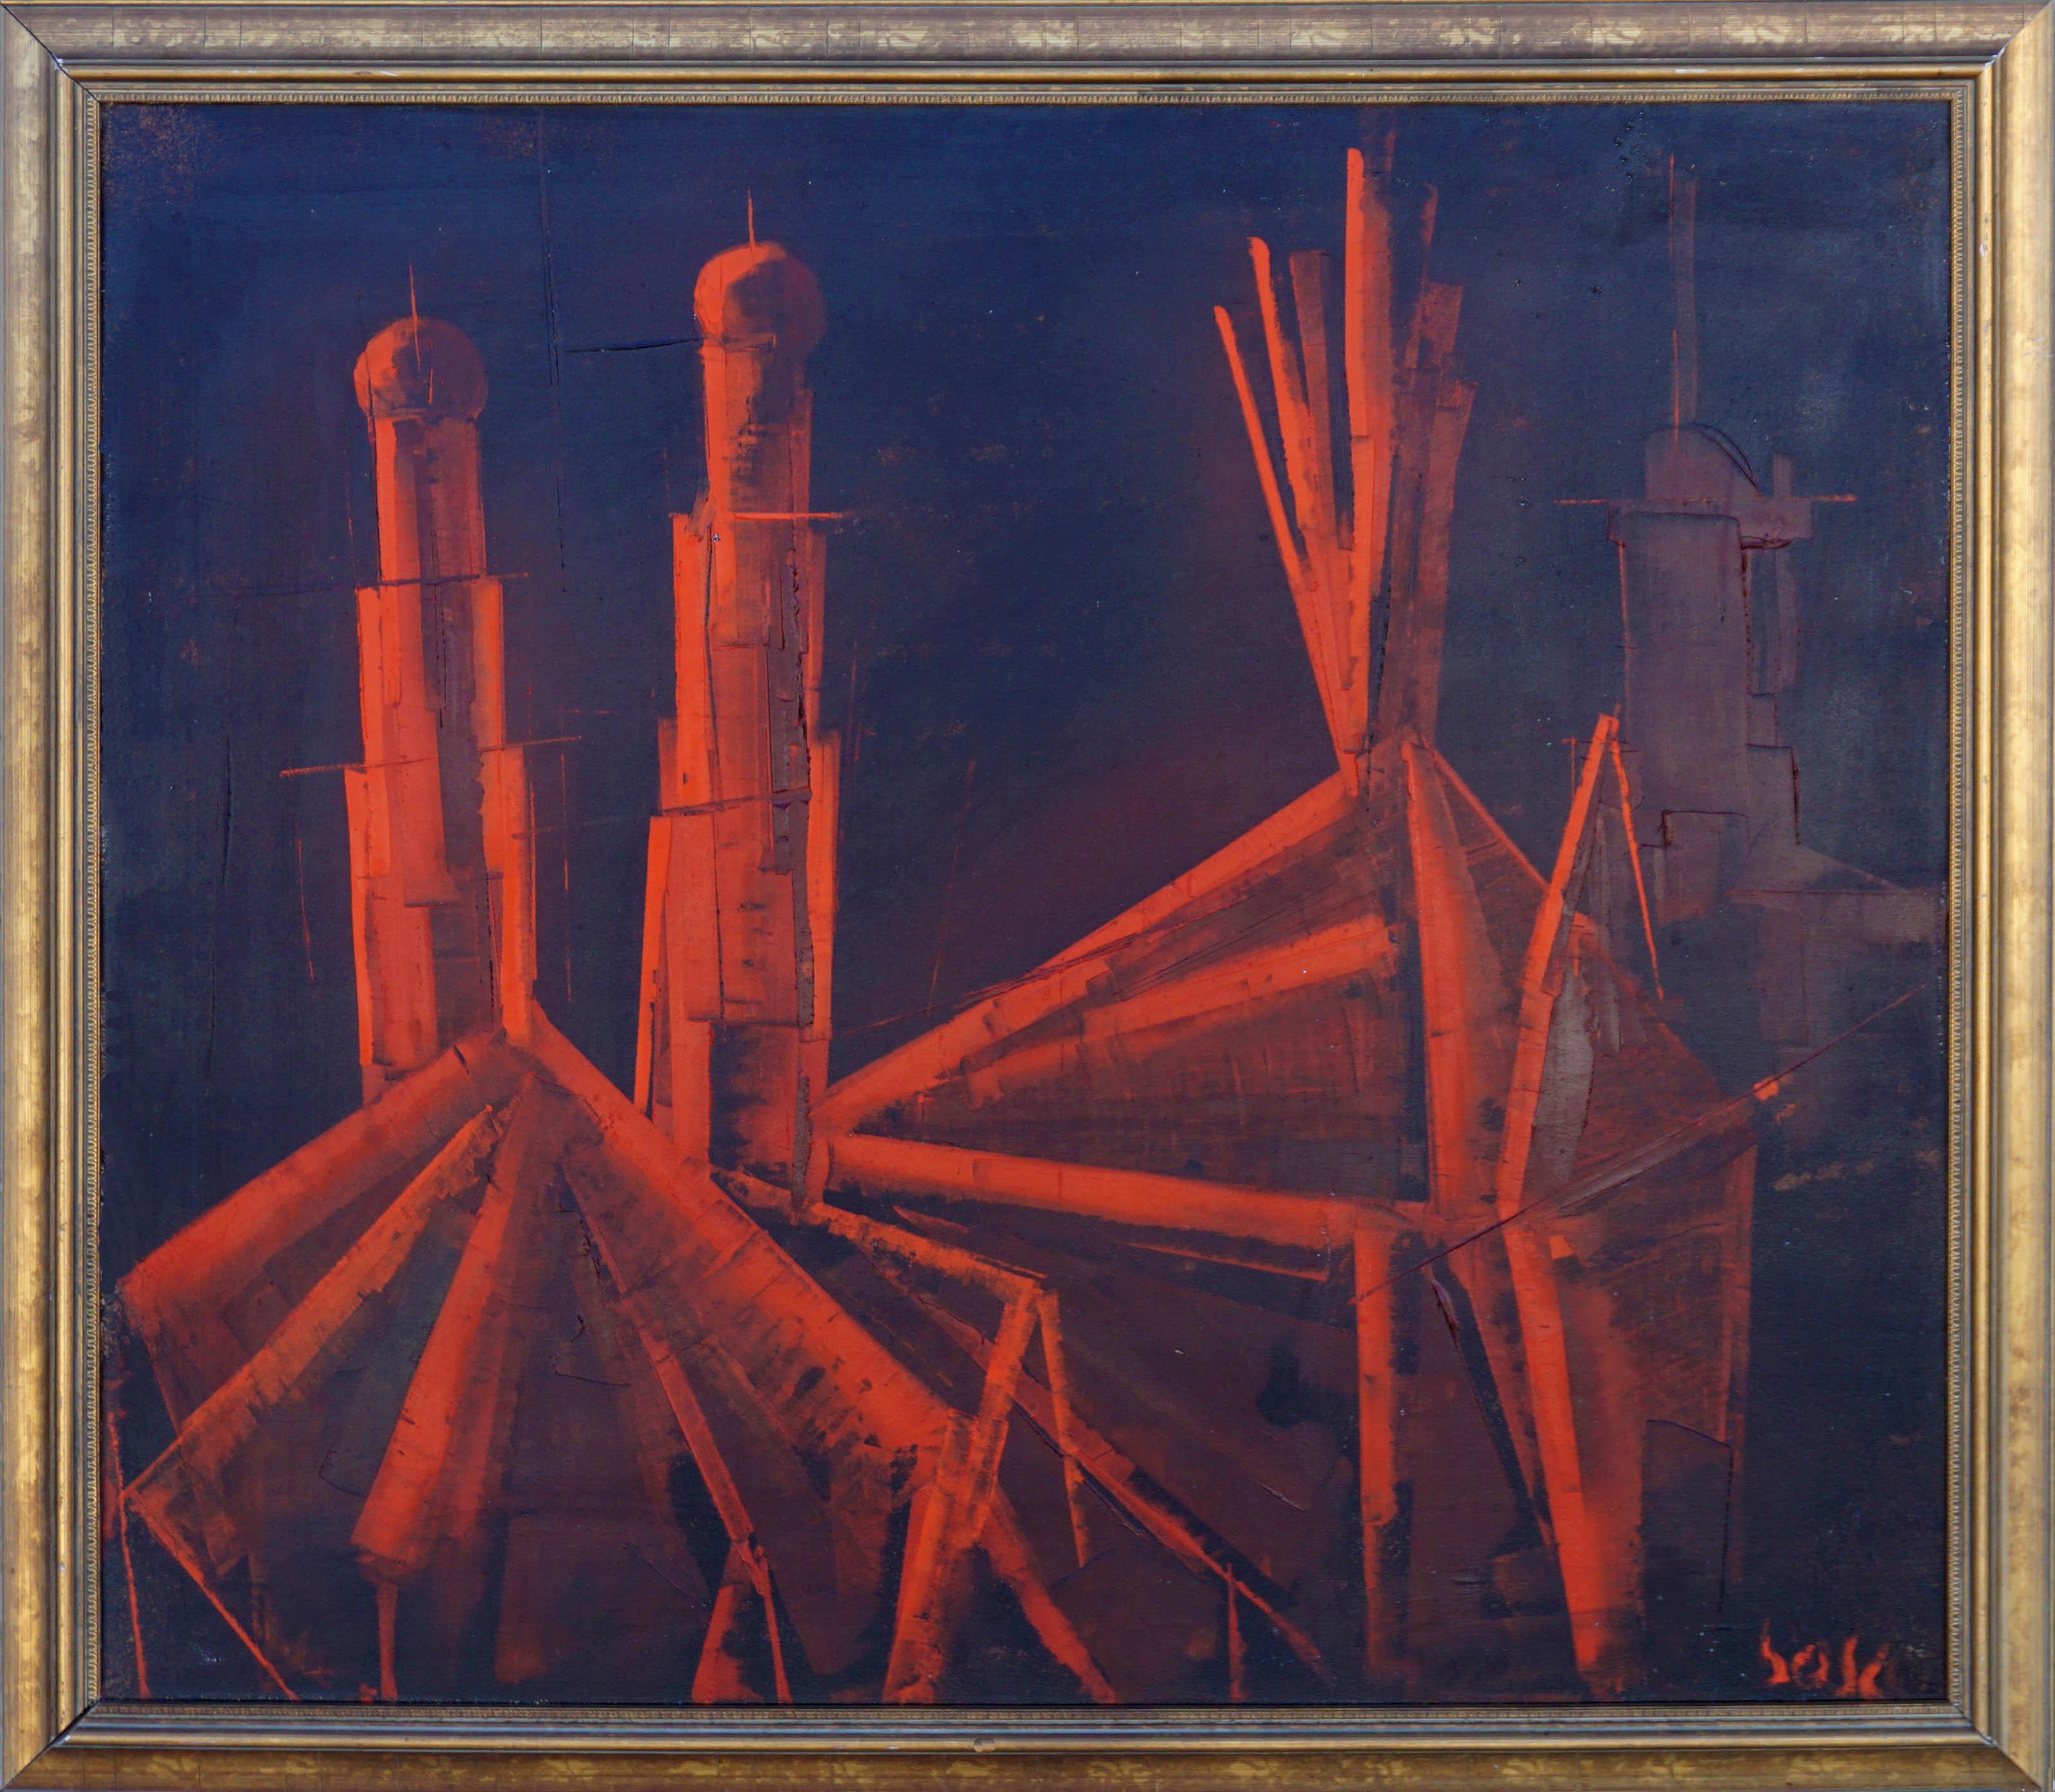 Pierre Bosco Abstract Painting - "Cathédrale", Mid-Century Modern Red & Black Abstract Cubist Cathedral Landscape